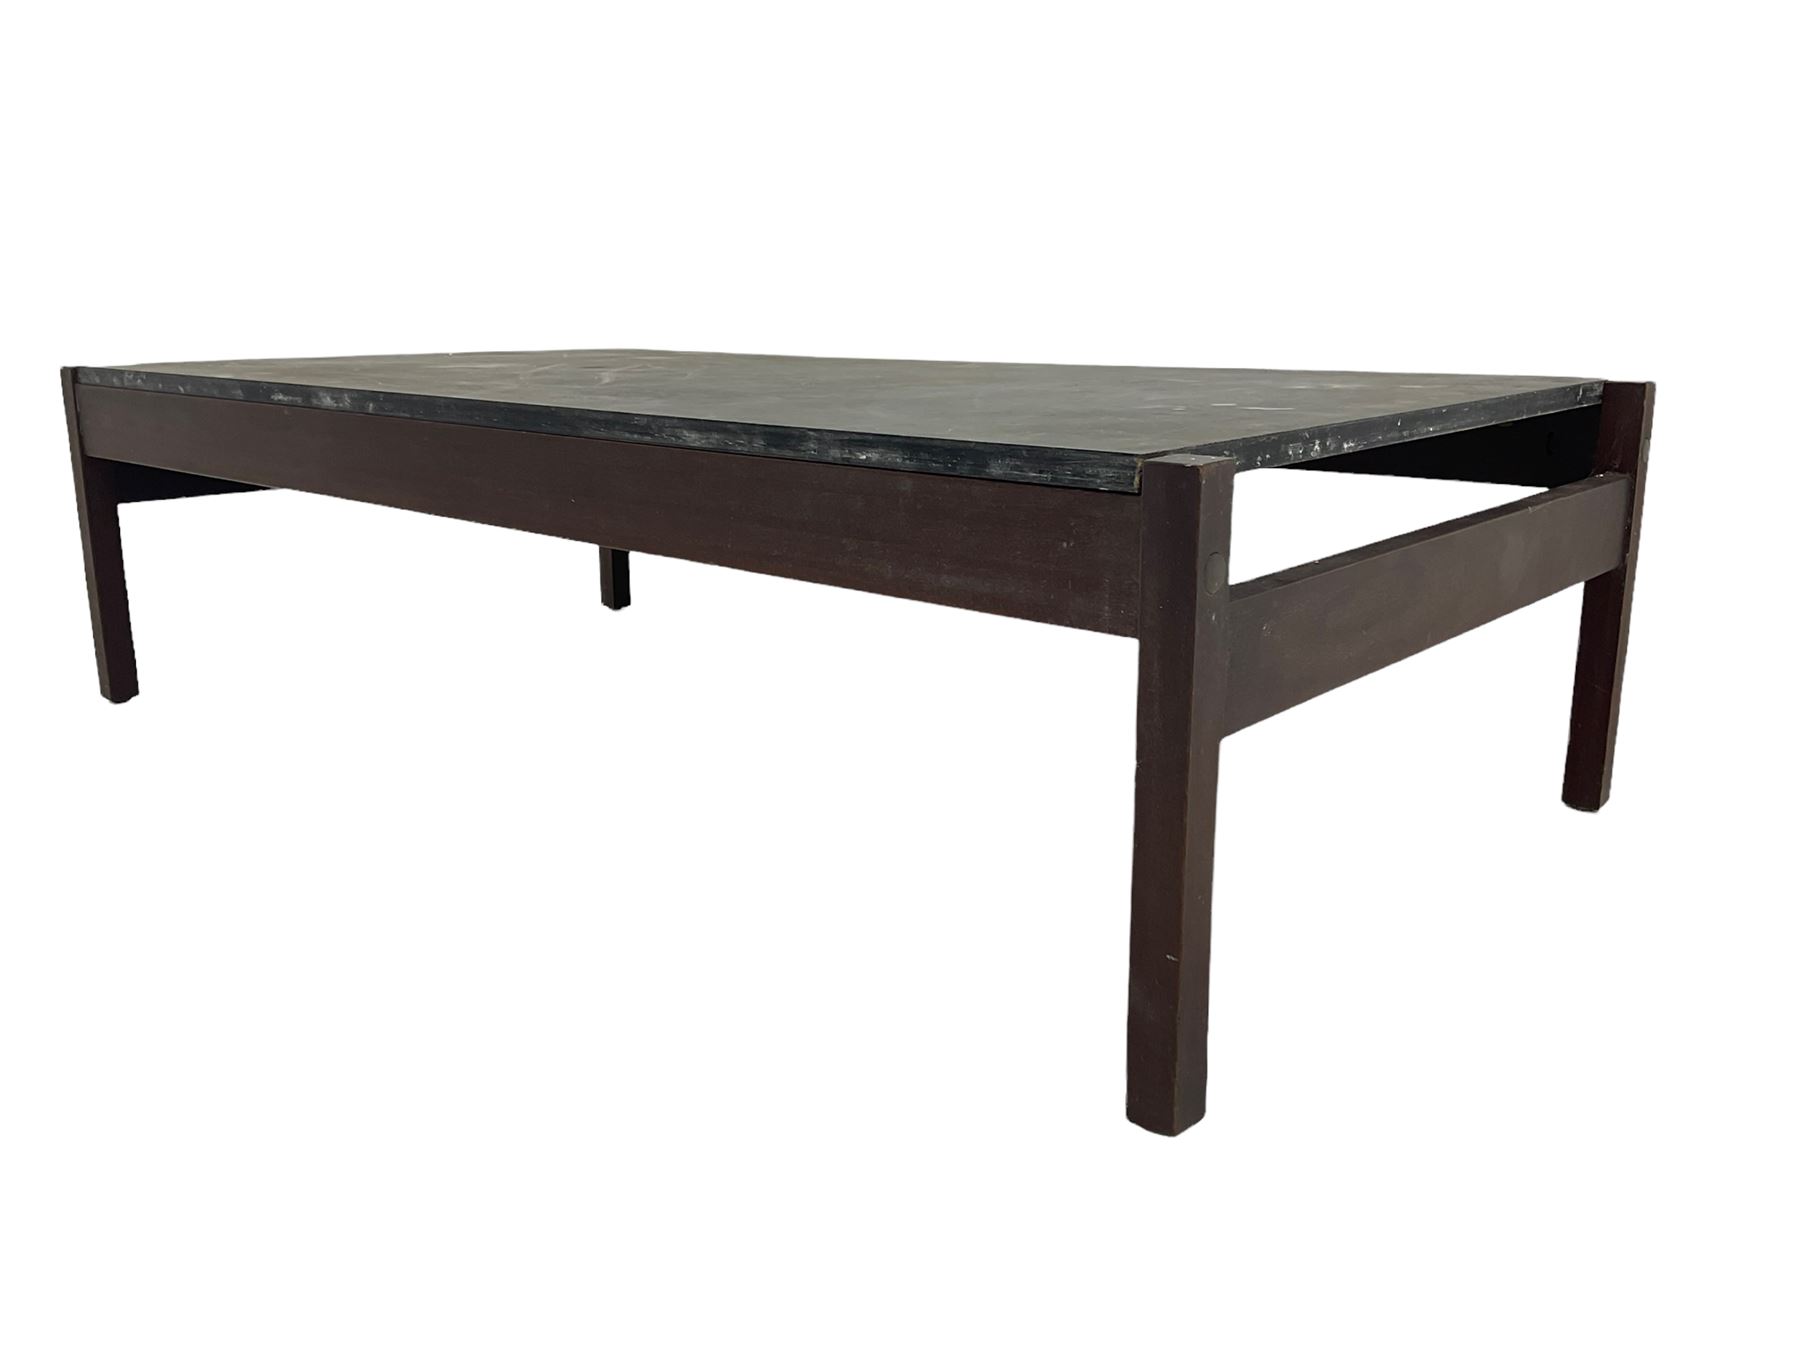 Mid-20th century rectangular teak coffee table with black lacquered top (117cm x 61cm - Image 3 of 8